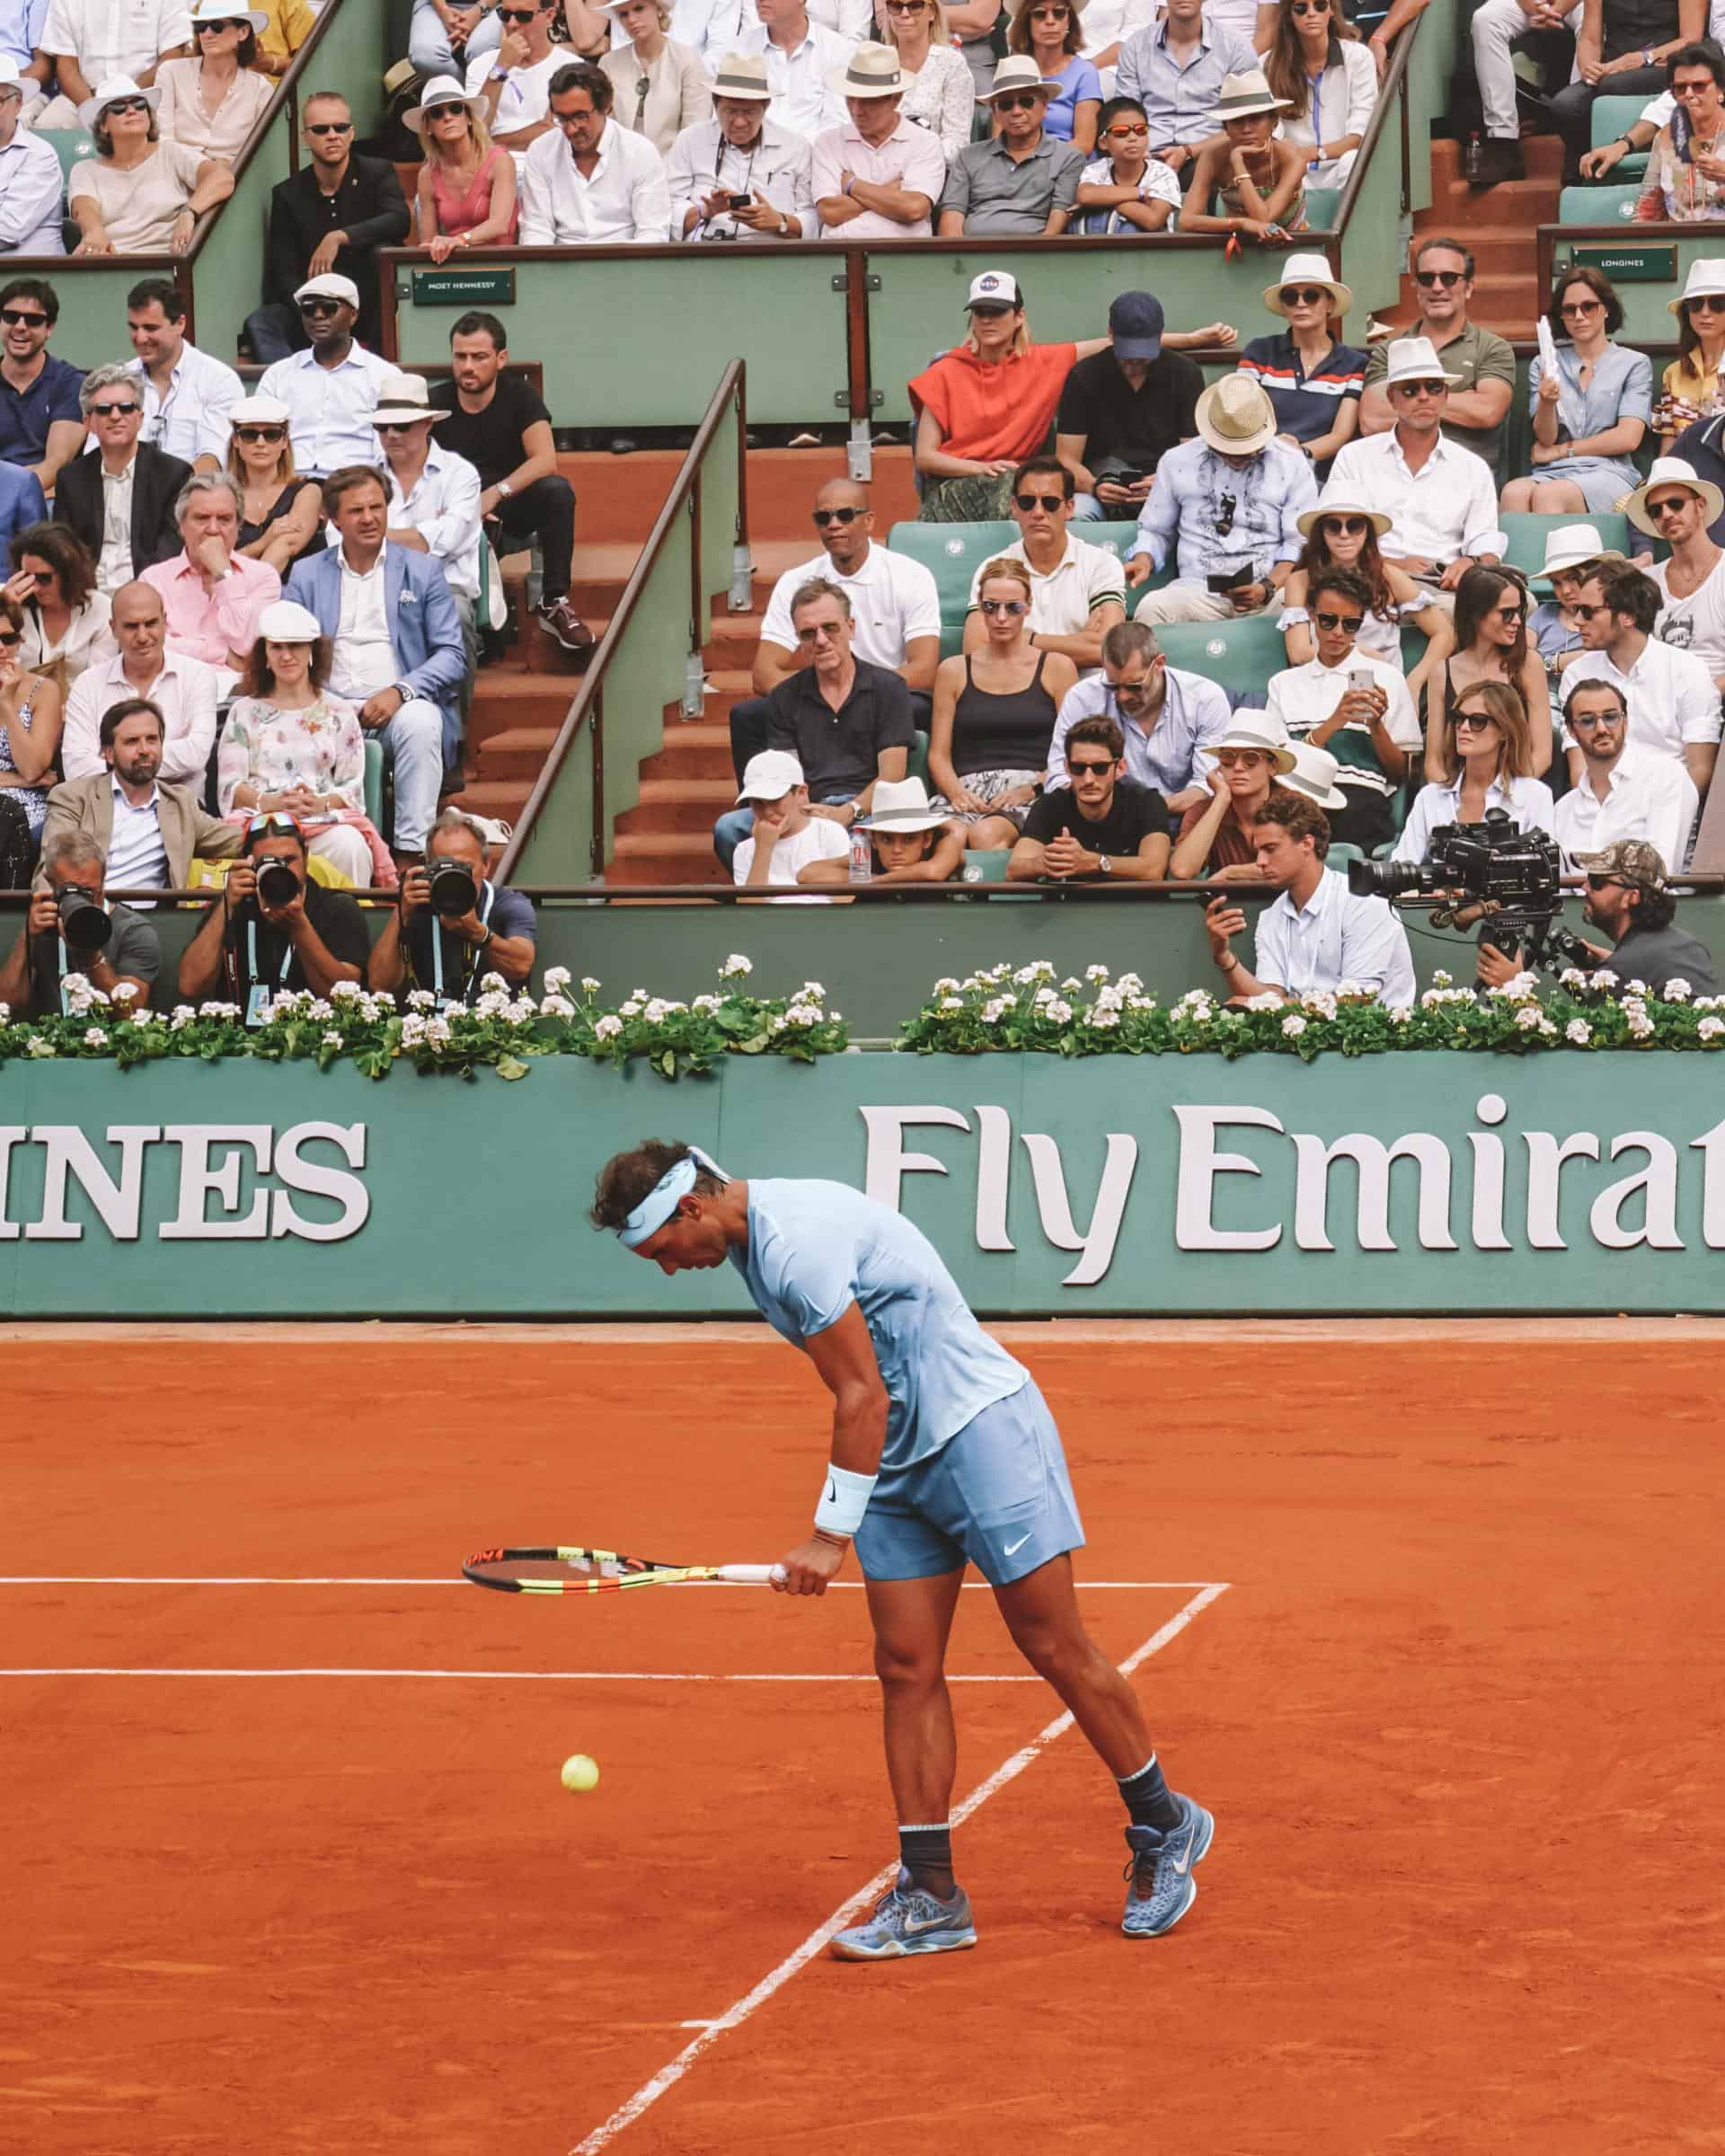 French open 2018 Nadal getting ready to serve 